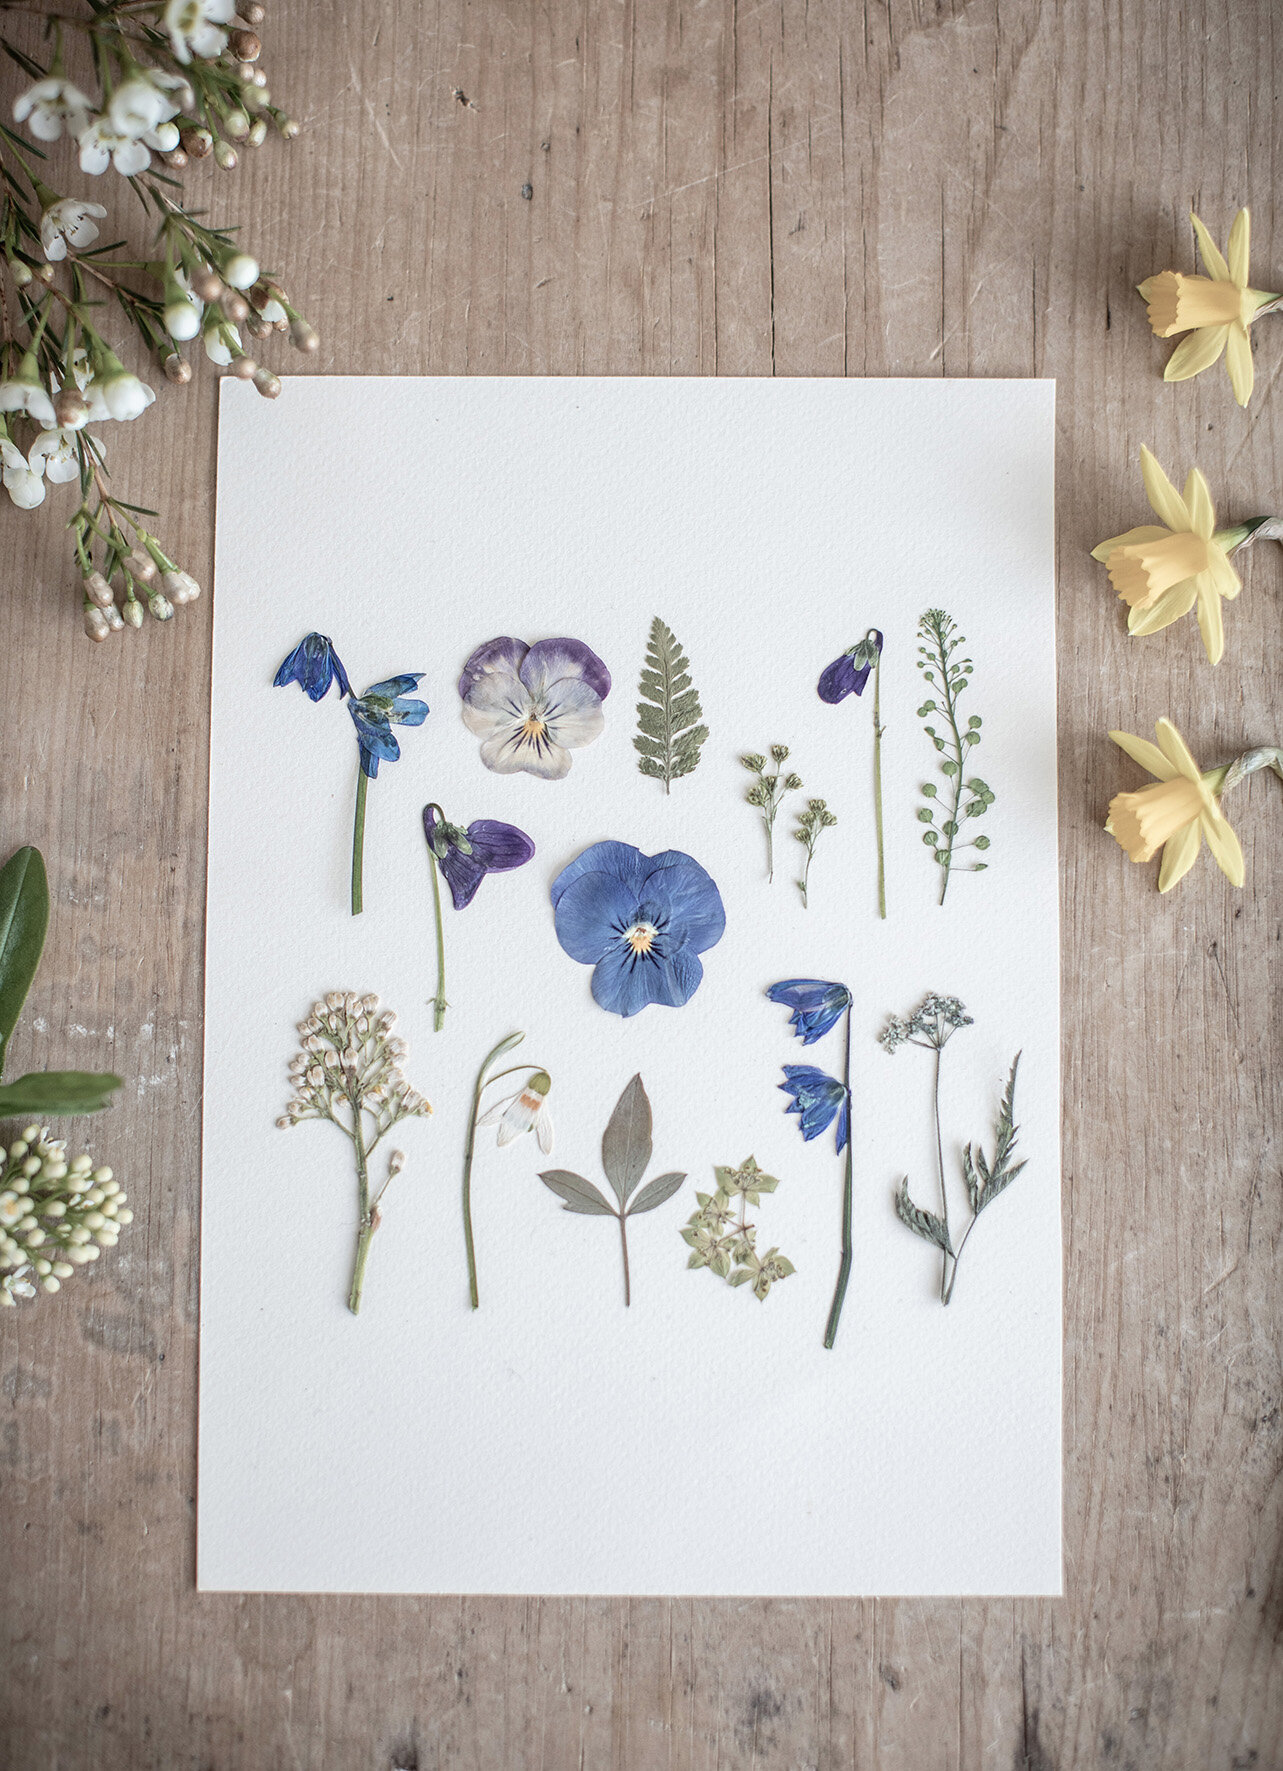 Pressing Flowers & Dried Flower Art - Try Something New Every Month